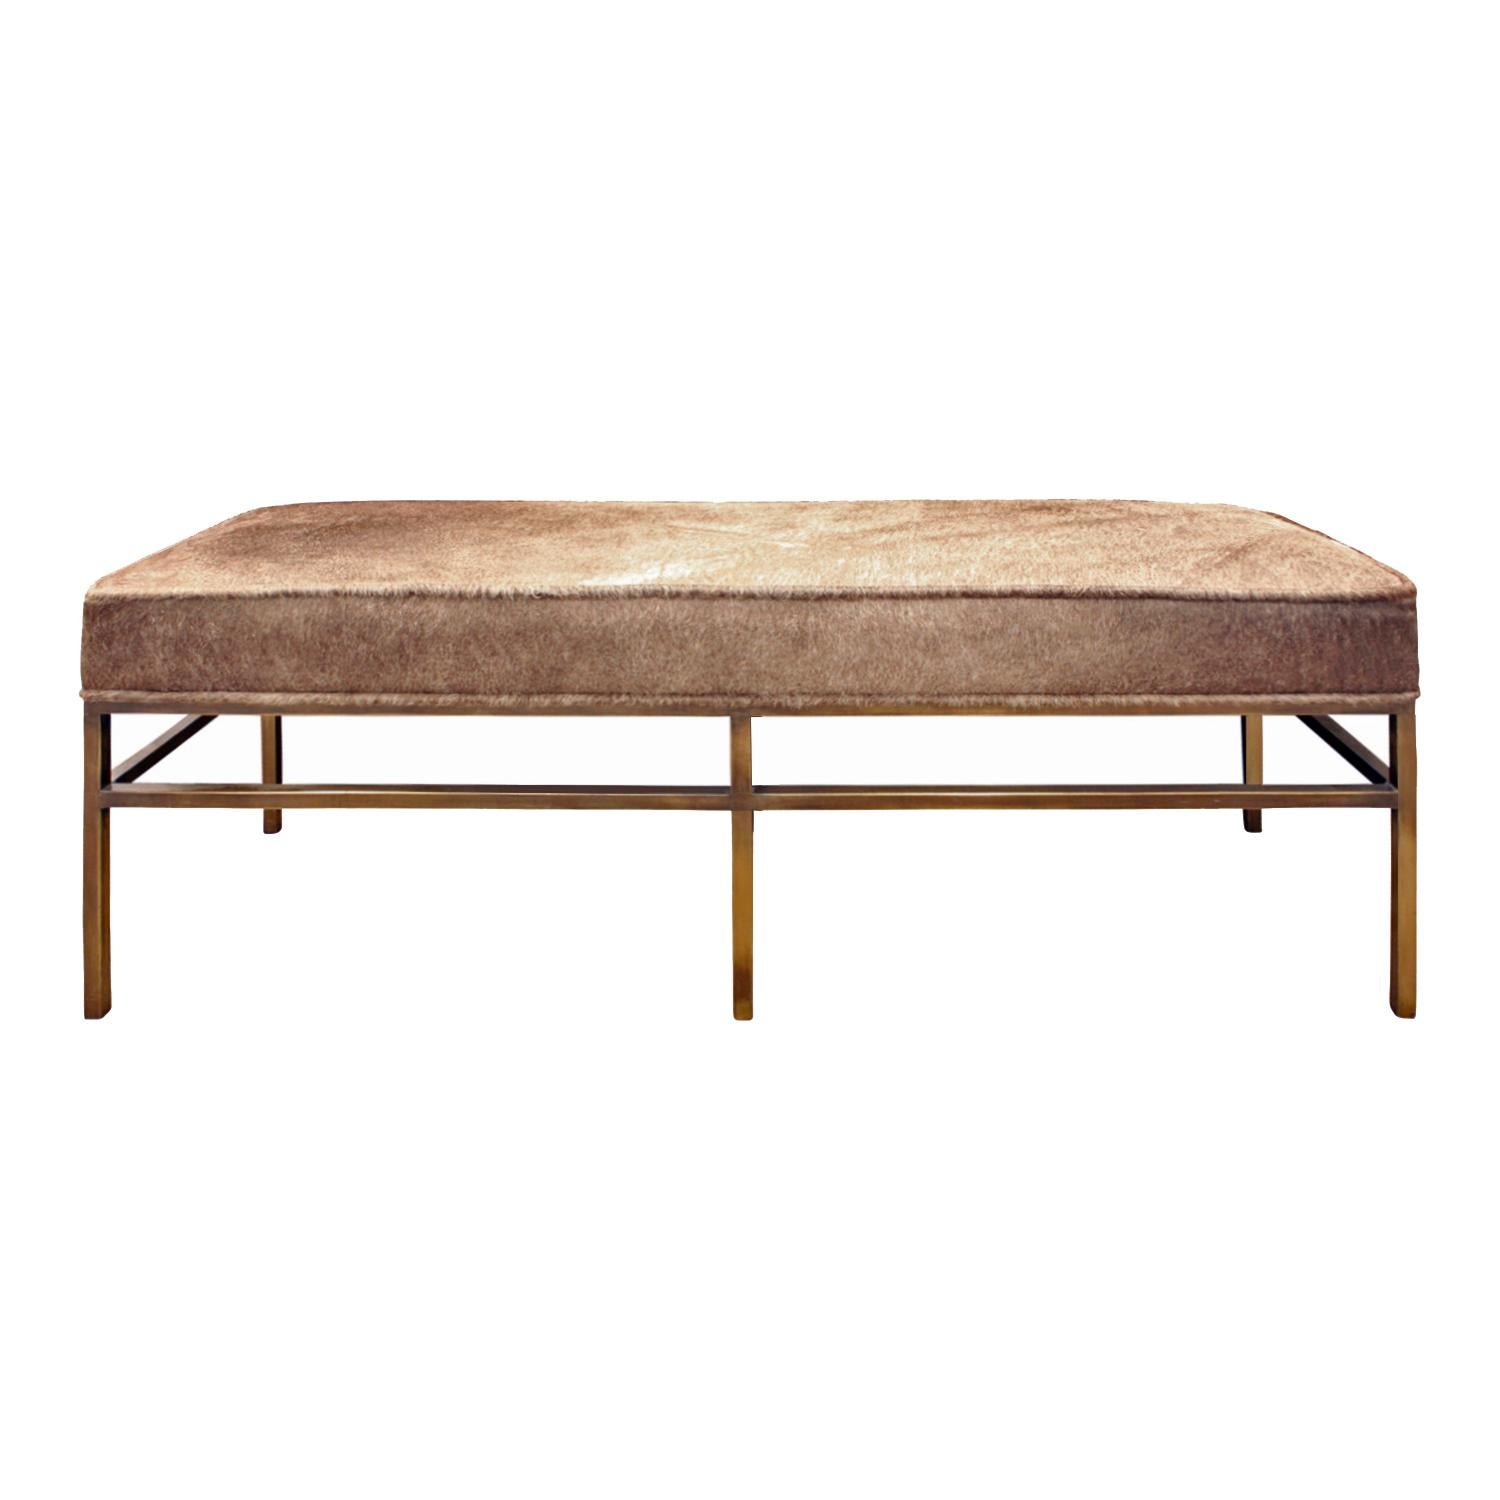 Architectural Bench in Pony Skin with Bronze Base, 1970s